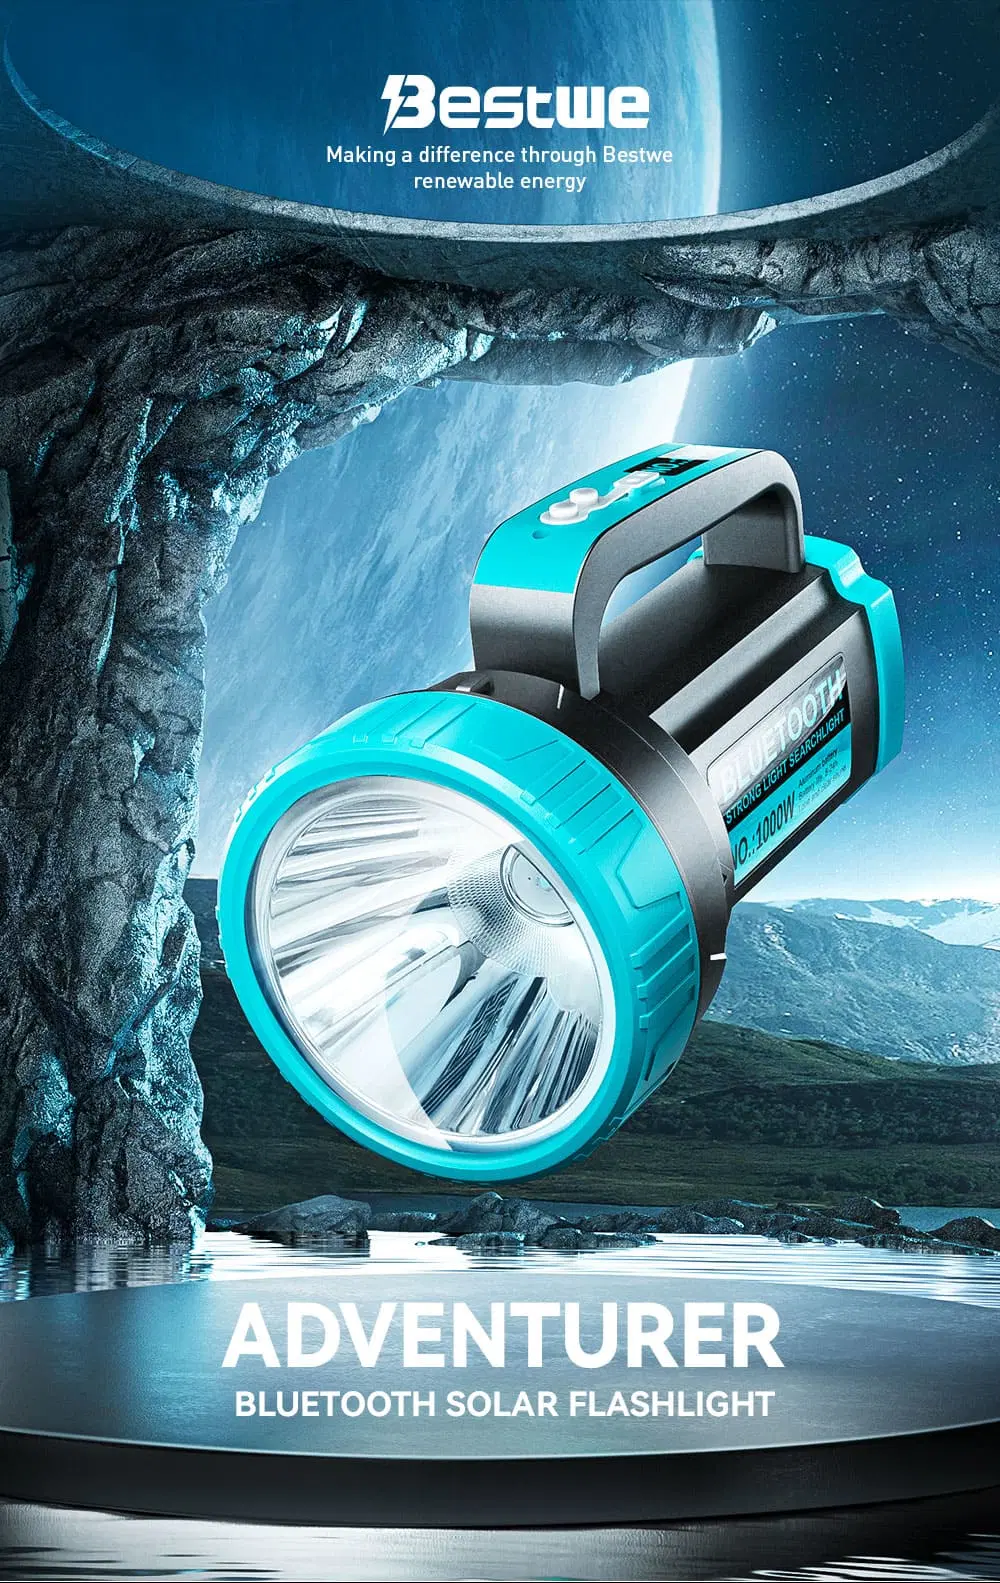 Solar Brilliance Unleashed 500m Lighting Range Paired with Crystal-Clear Bluetooth Sound Solar Flashlight